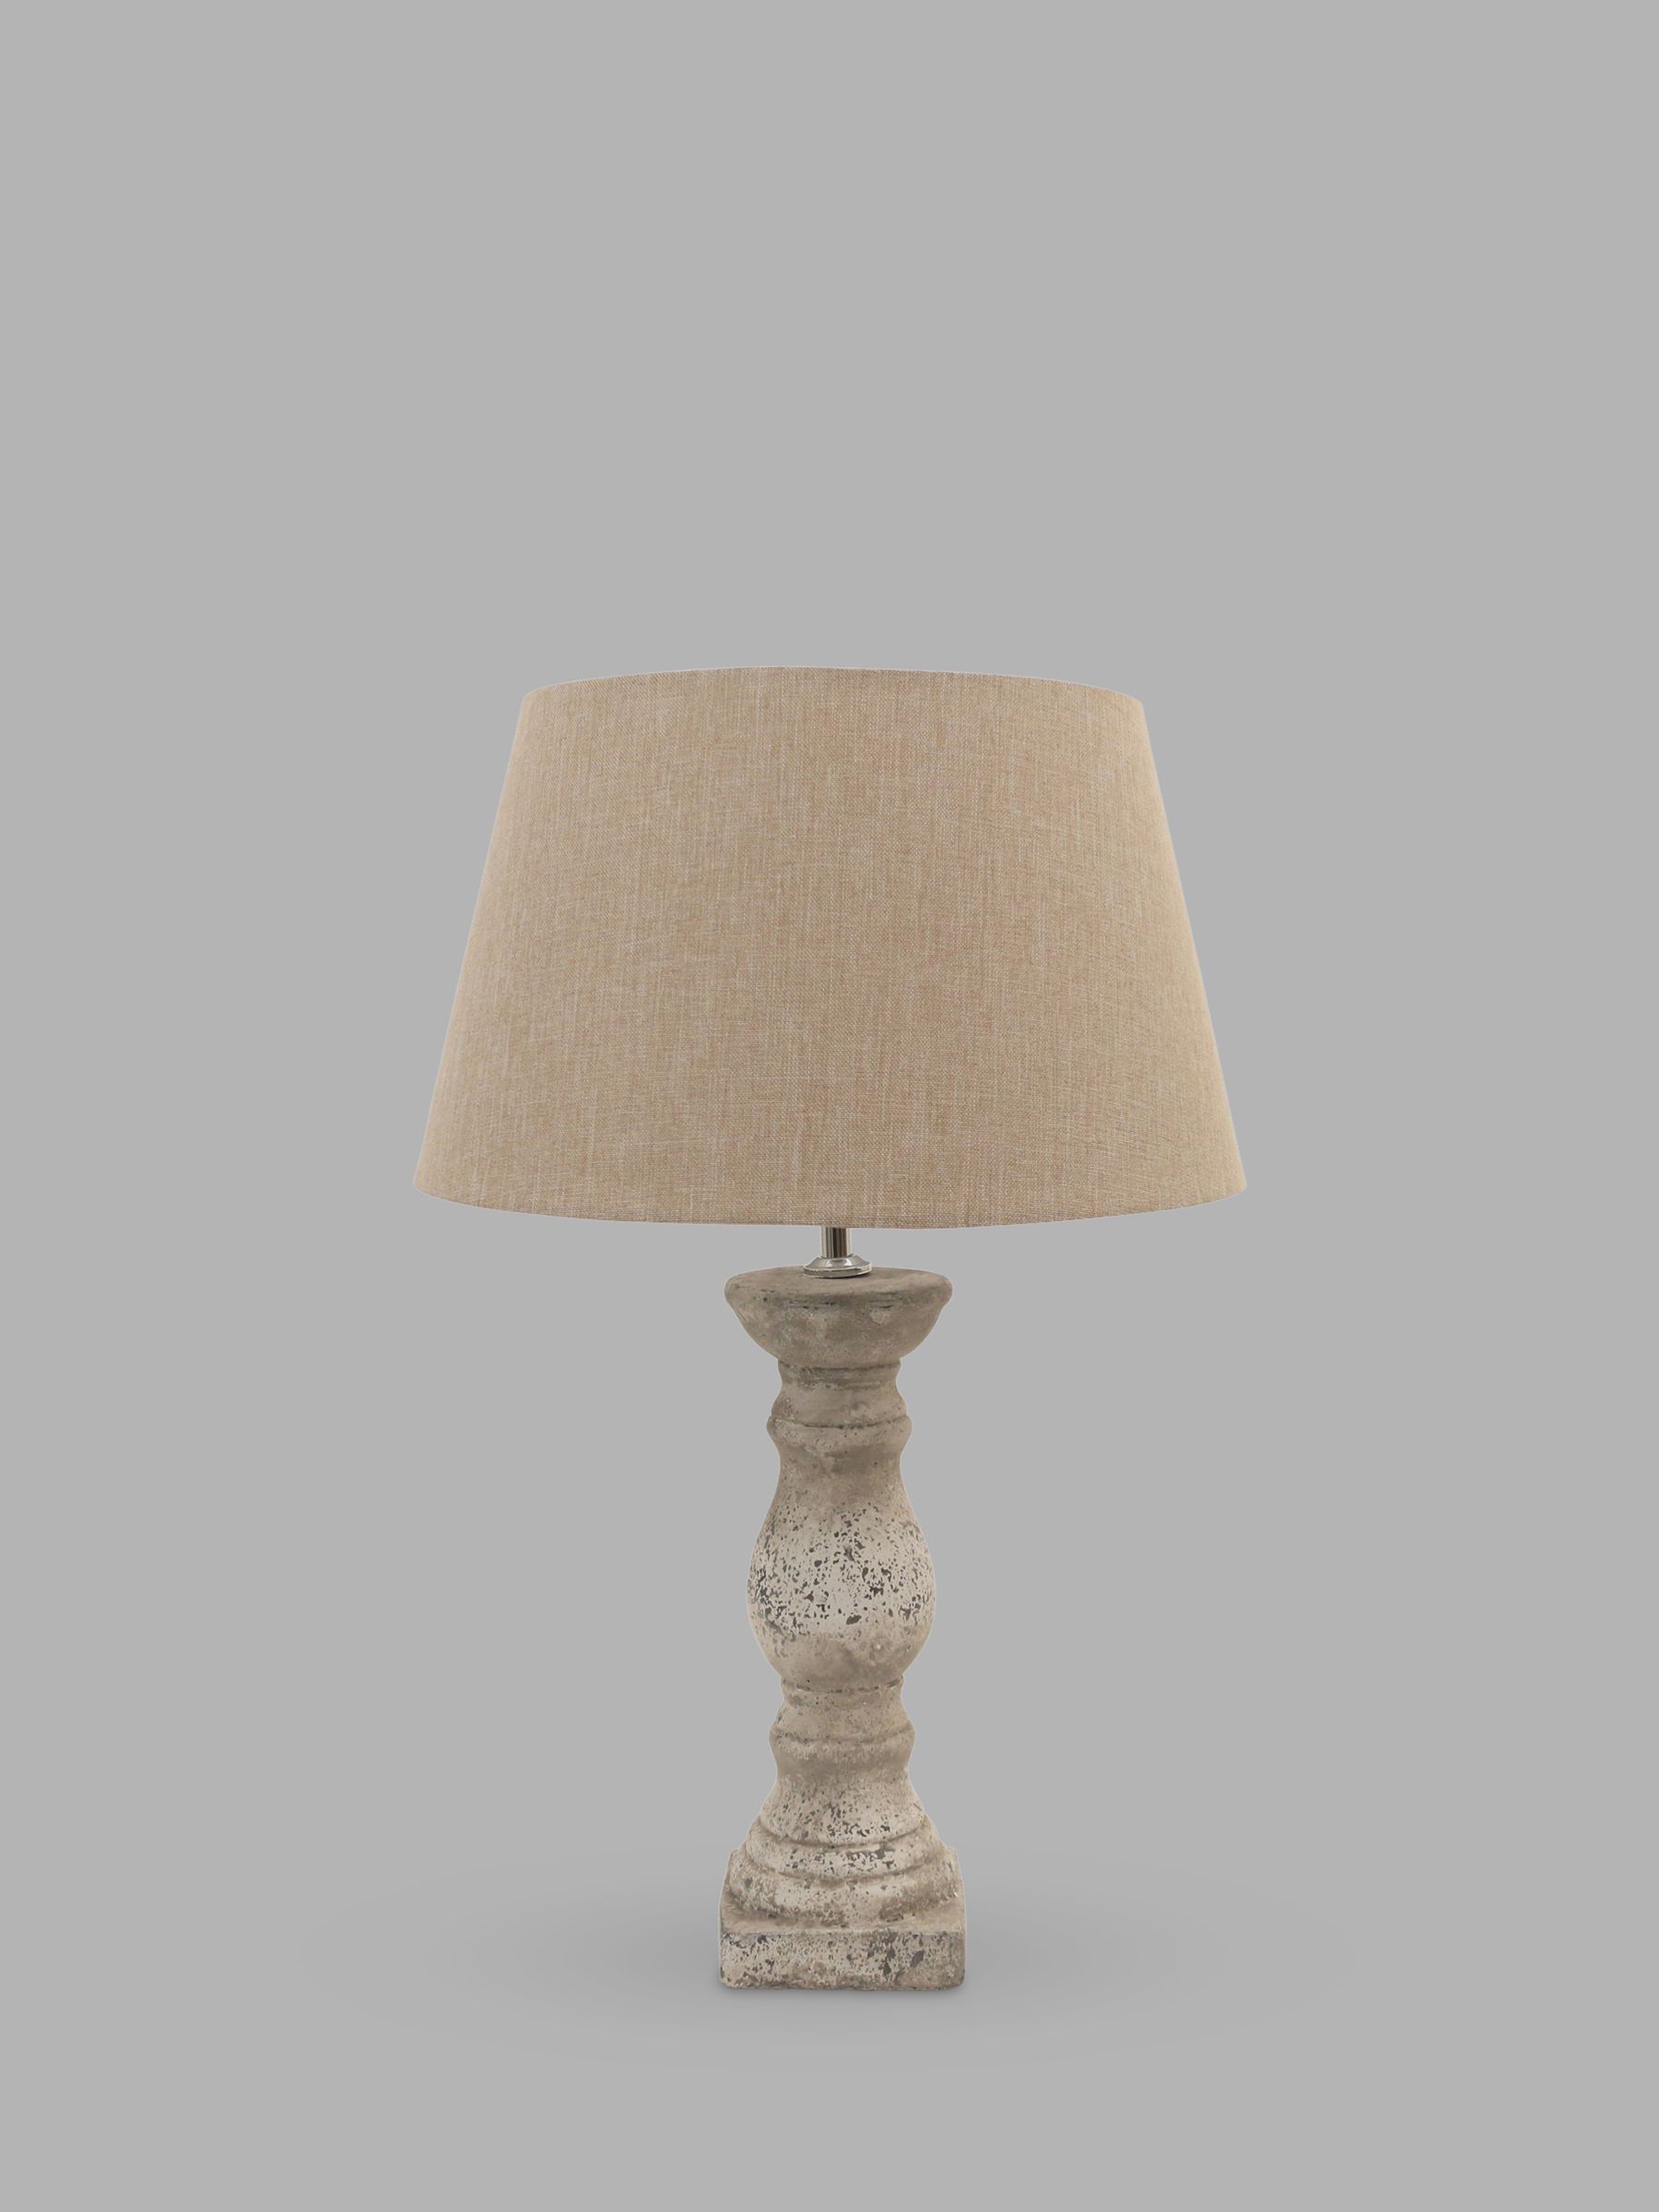 Photo of One.world birkdale curved base terracotta linen shade table lamp stone